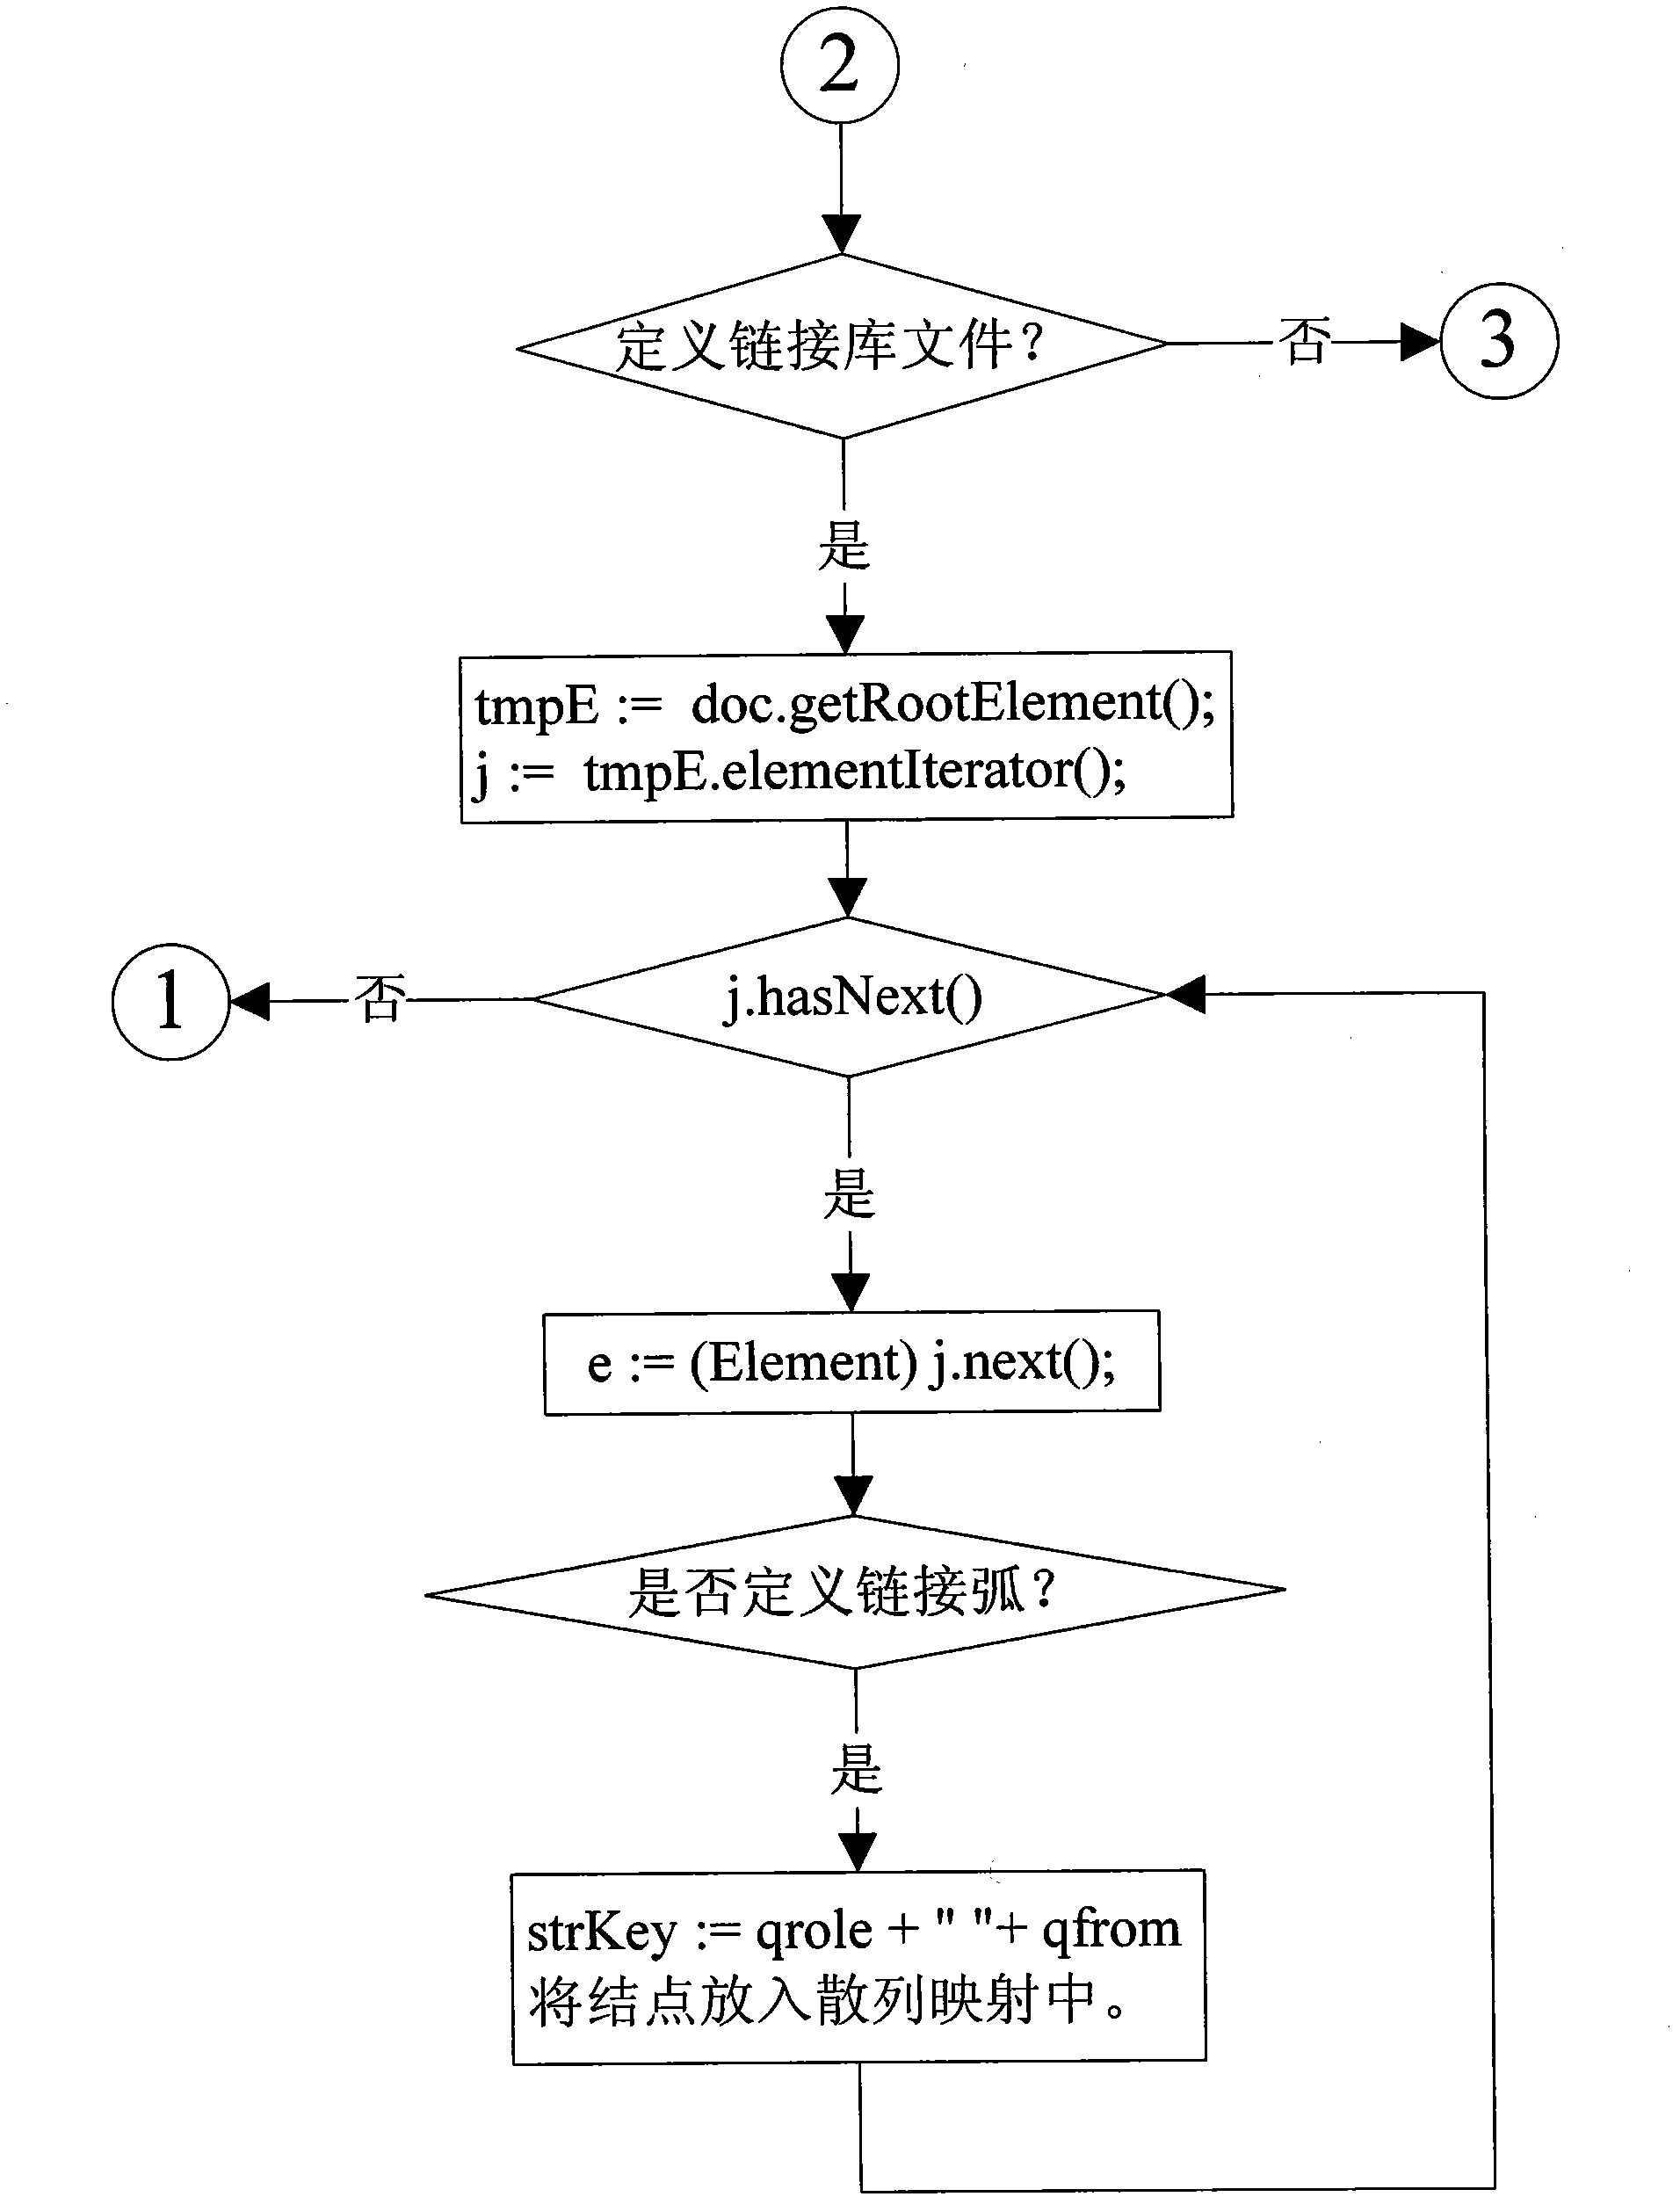 Creation-object-based extensible business reporting language (XBRL) taxonomy rapid-resolution method